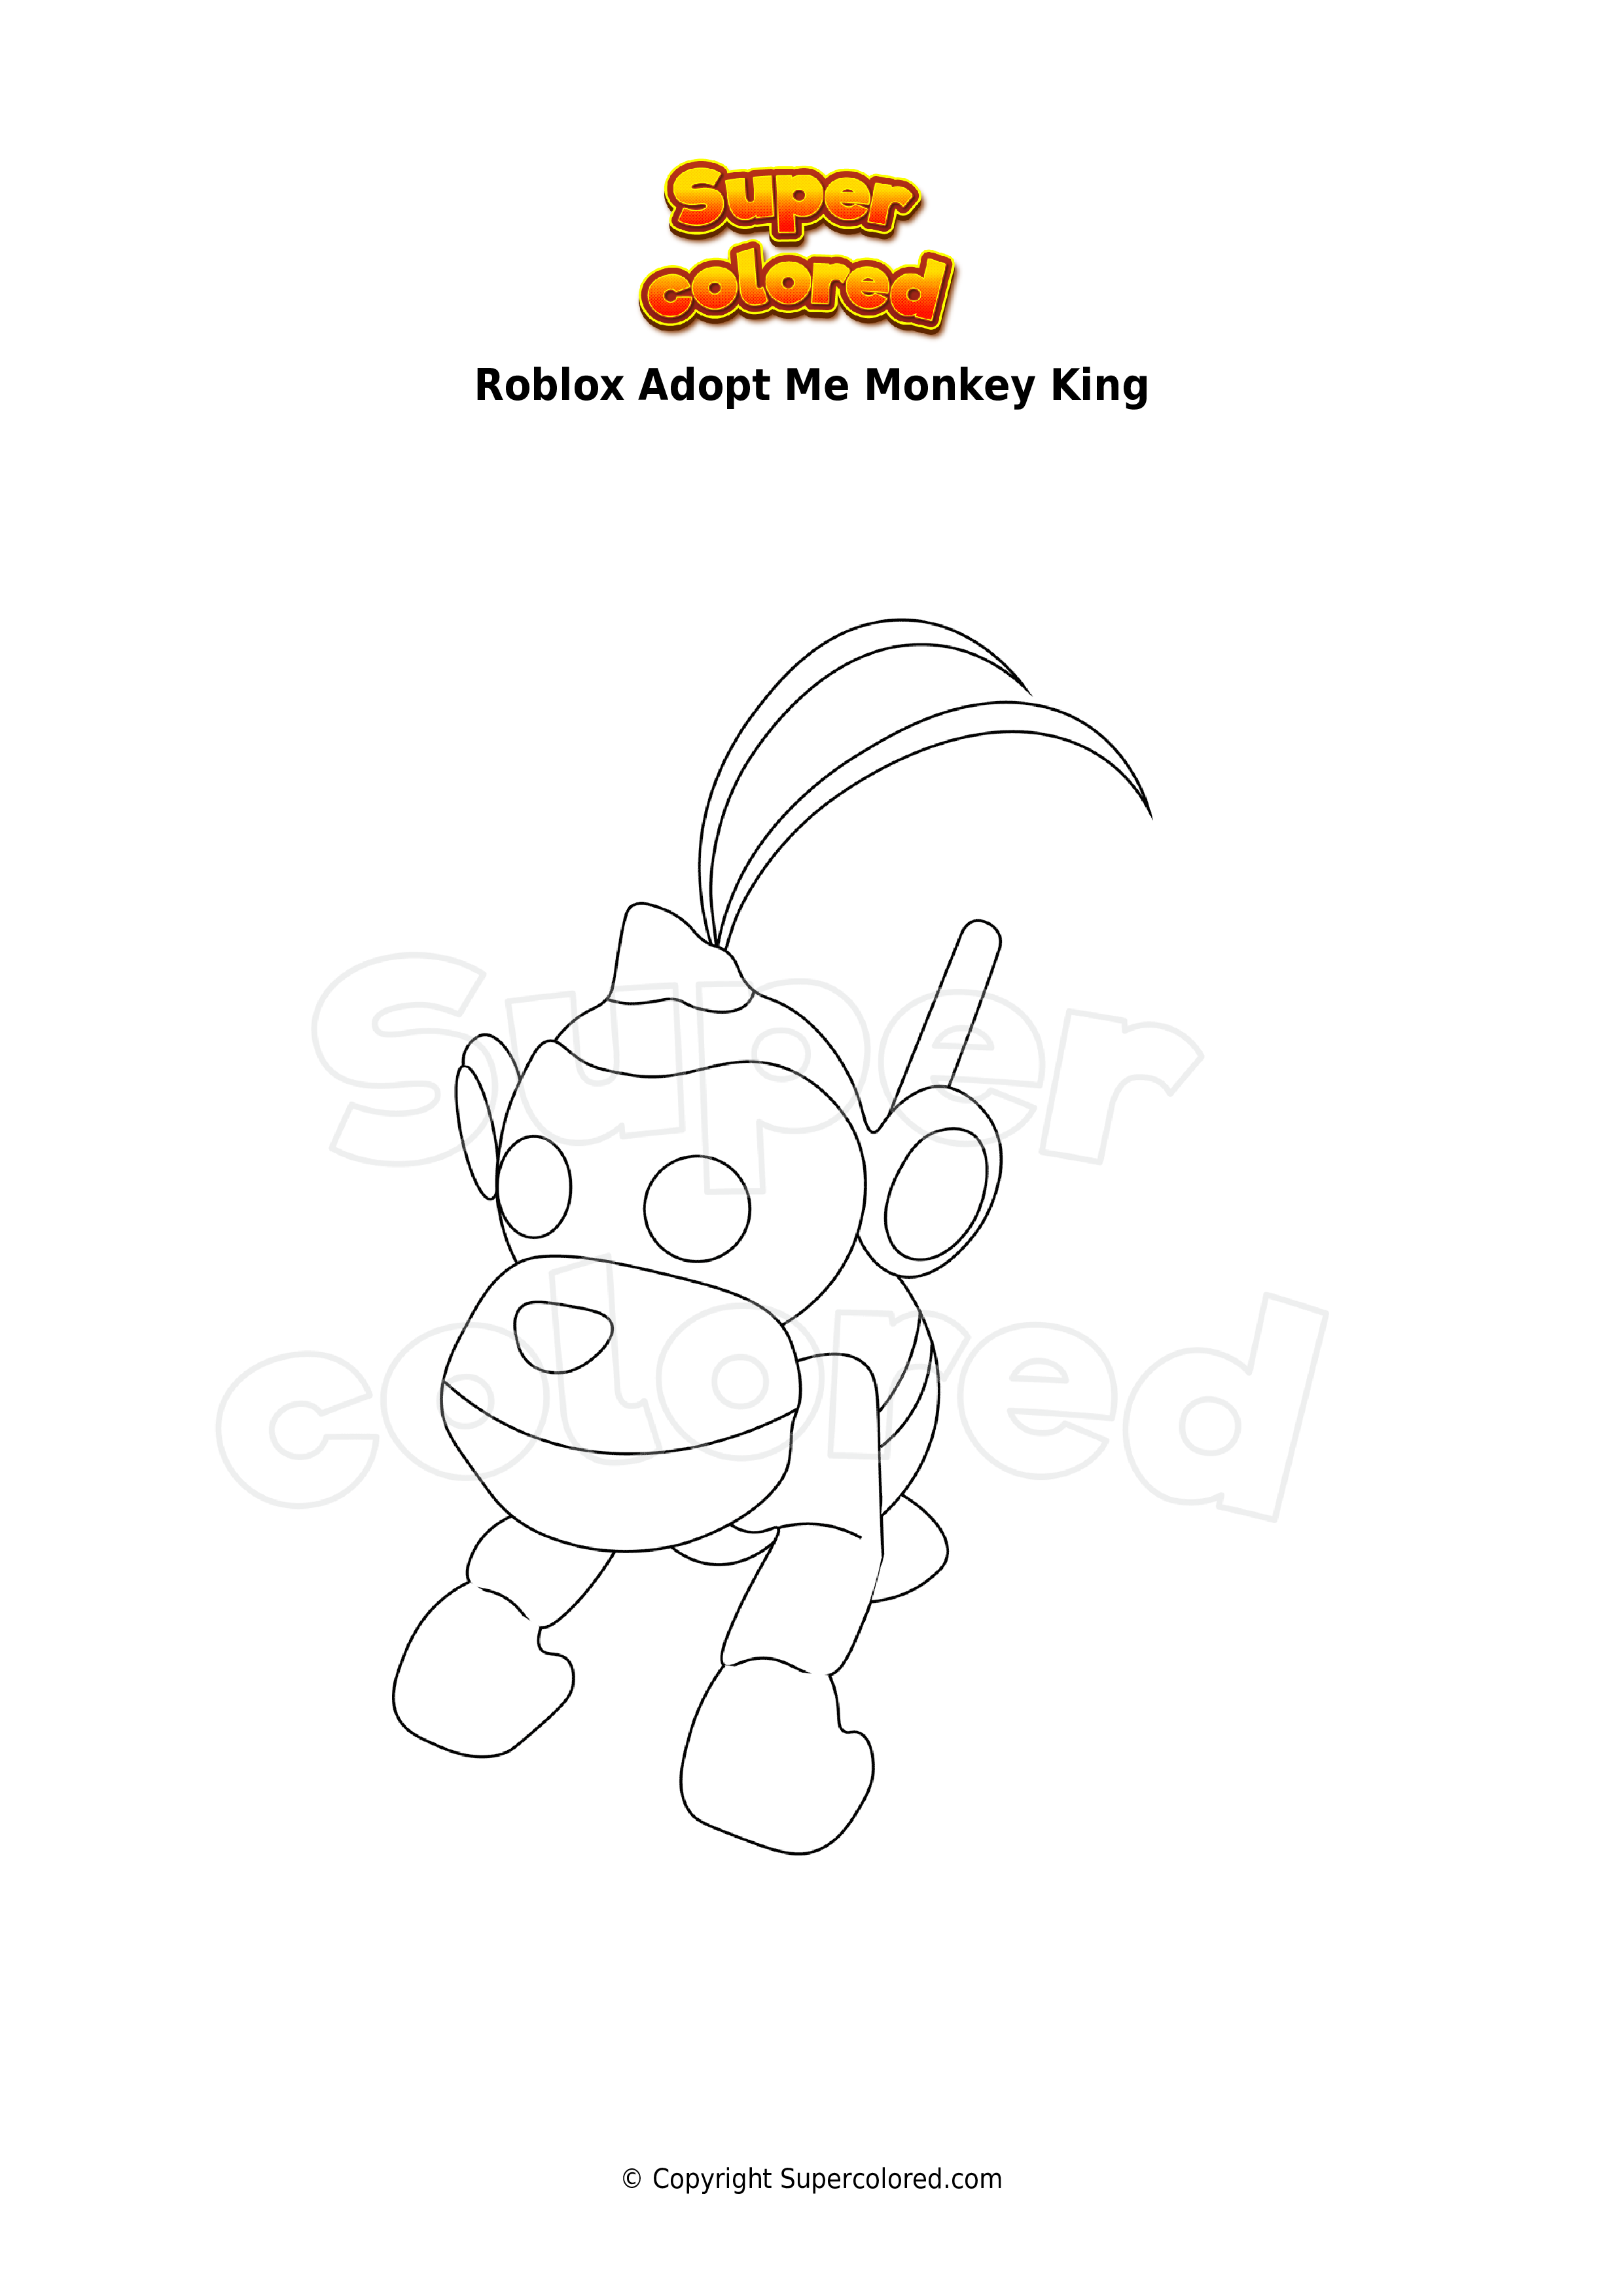 Coloring Pages   Roblox Adopt Me   Supercolored